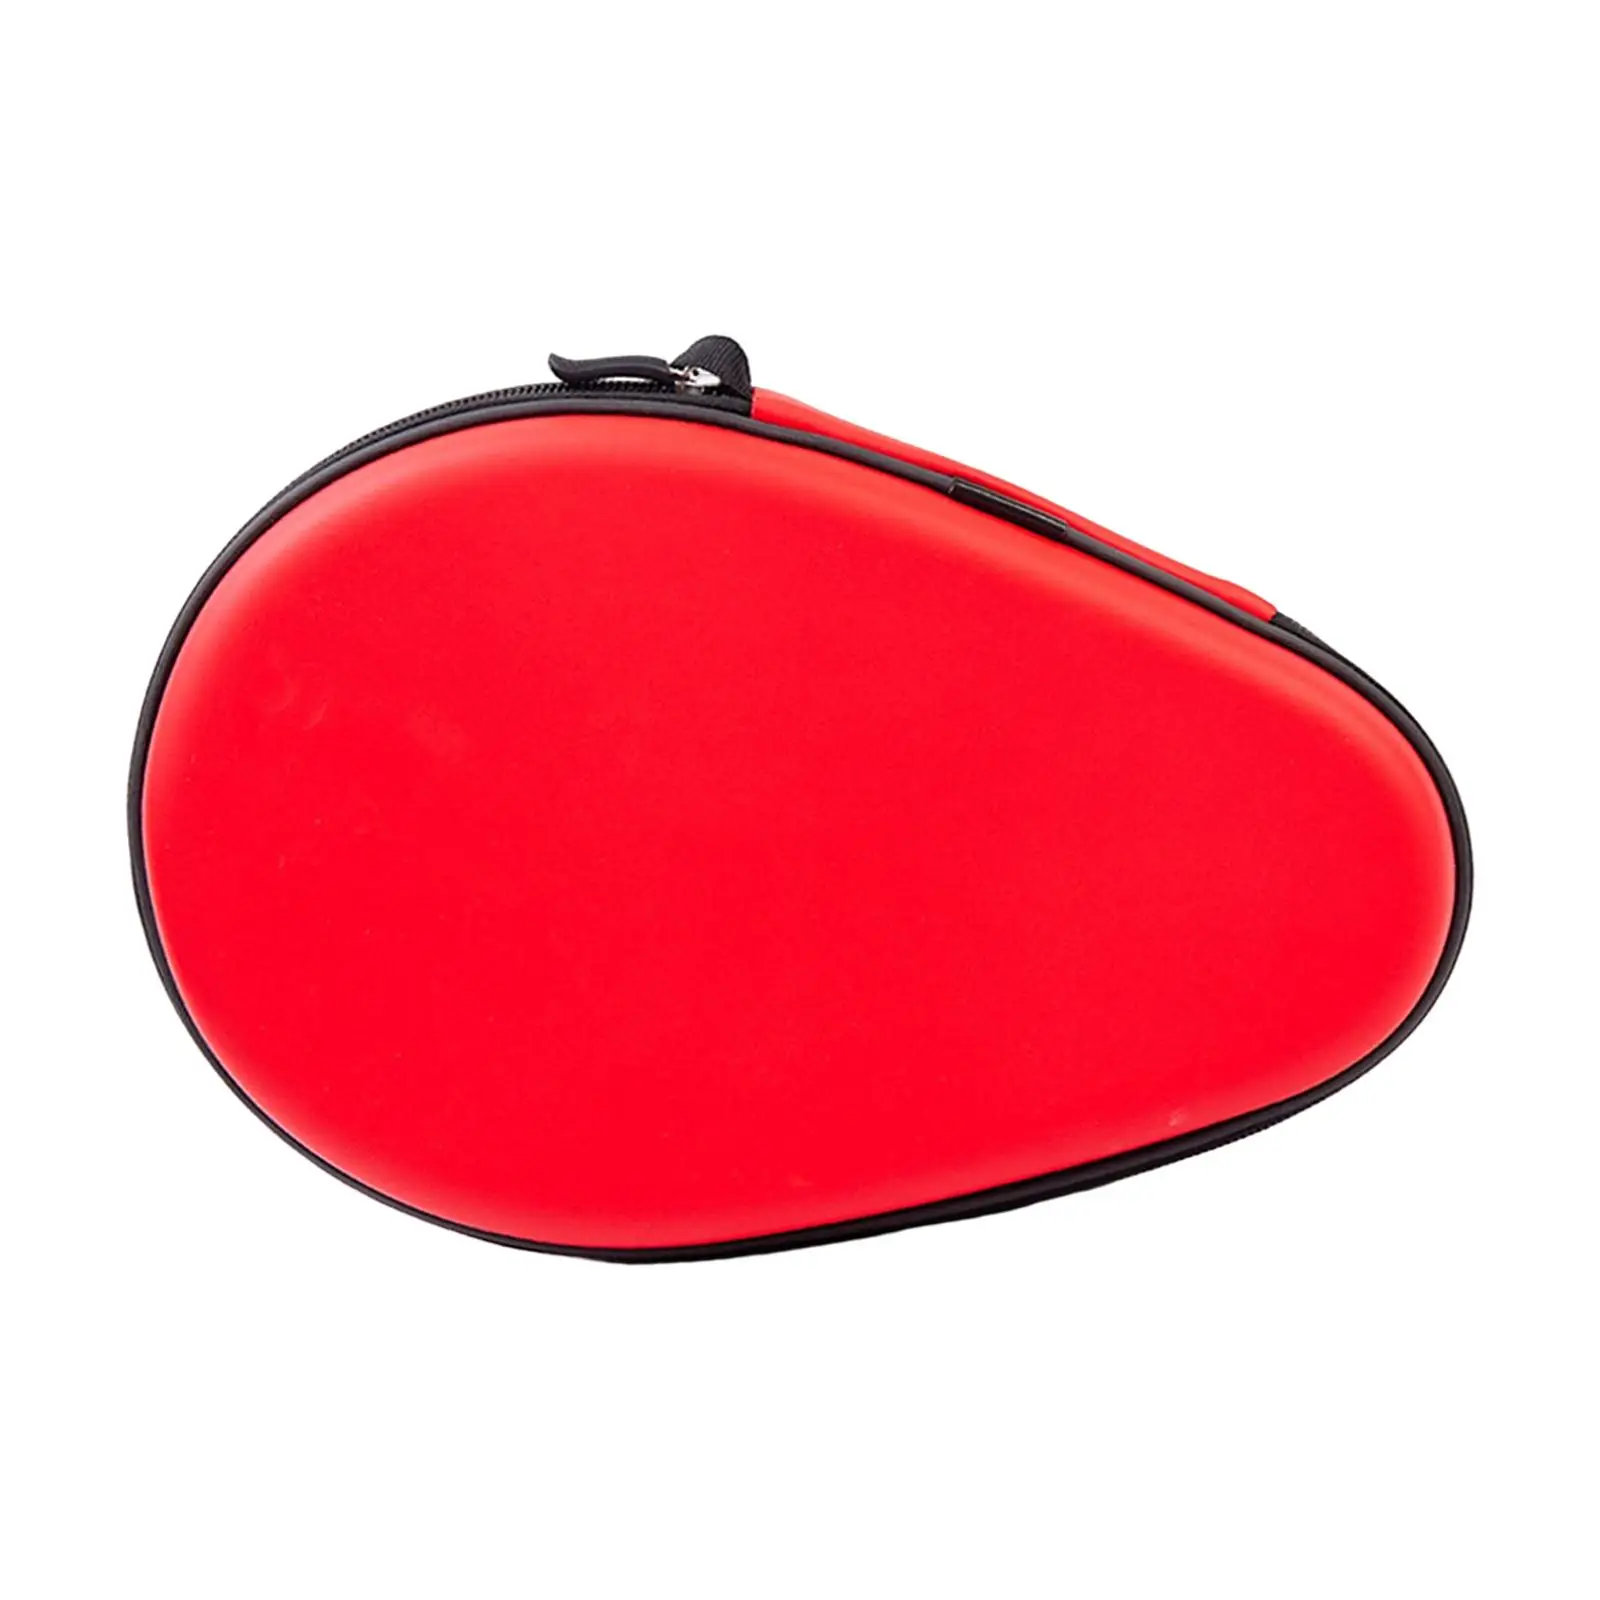 Professional Table Tennis Racket Case Lightweight Reusable Hard Gourd Sturdy Ping Pong Paddle Pocket for Training Outdoor Travel